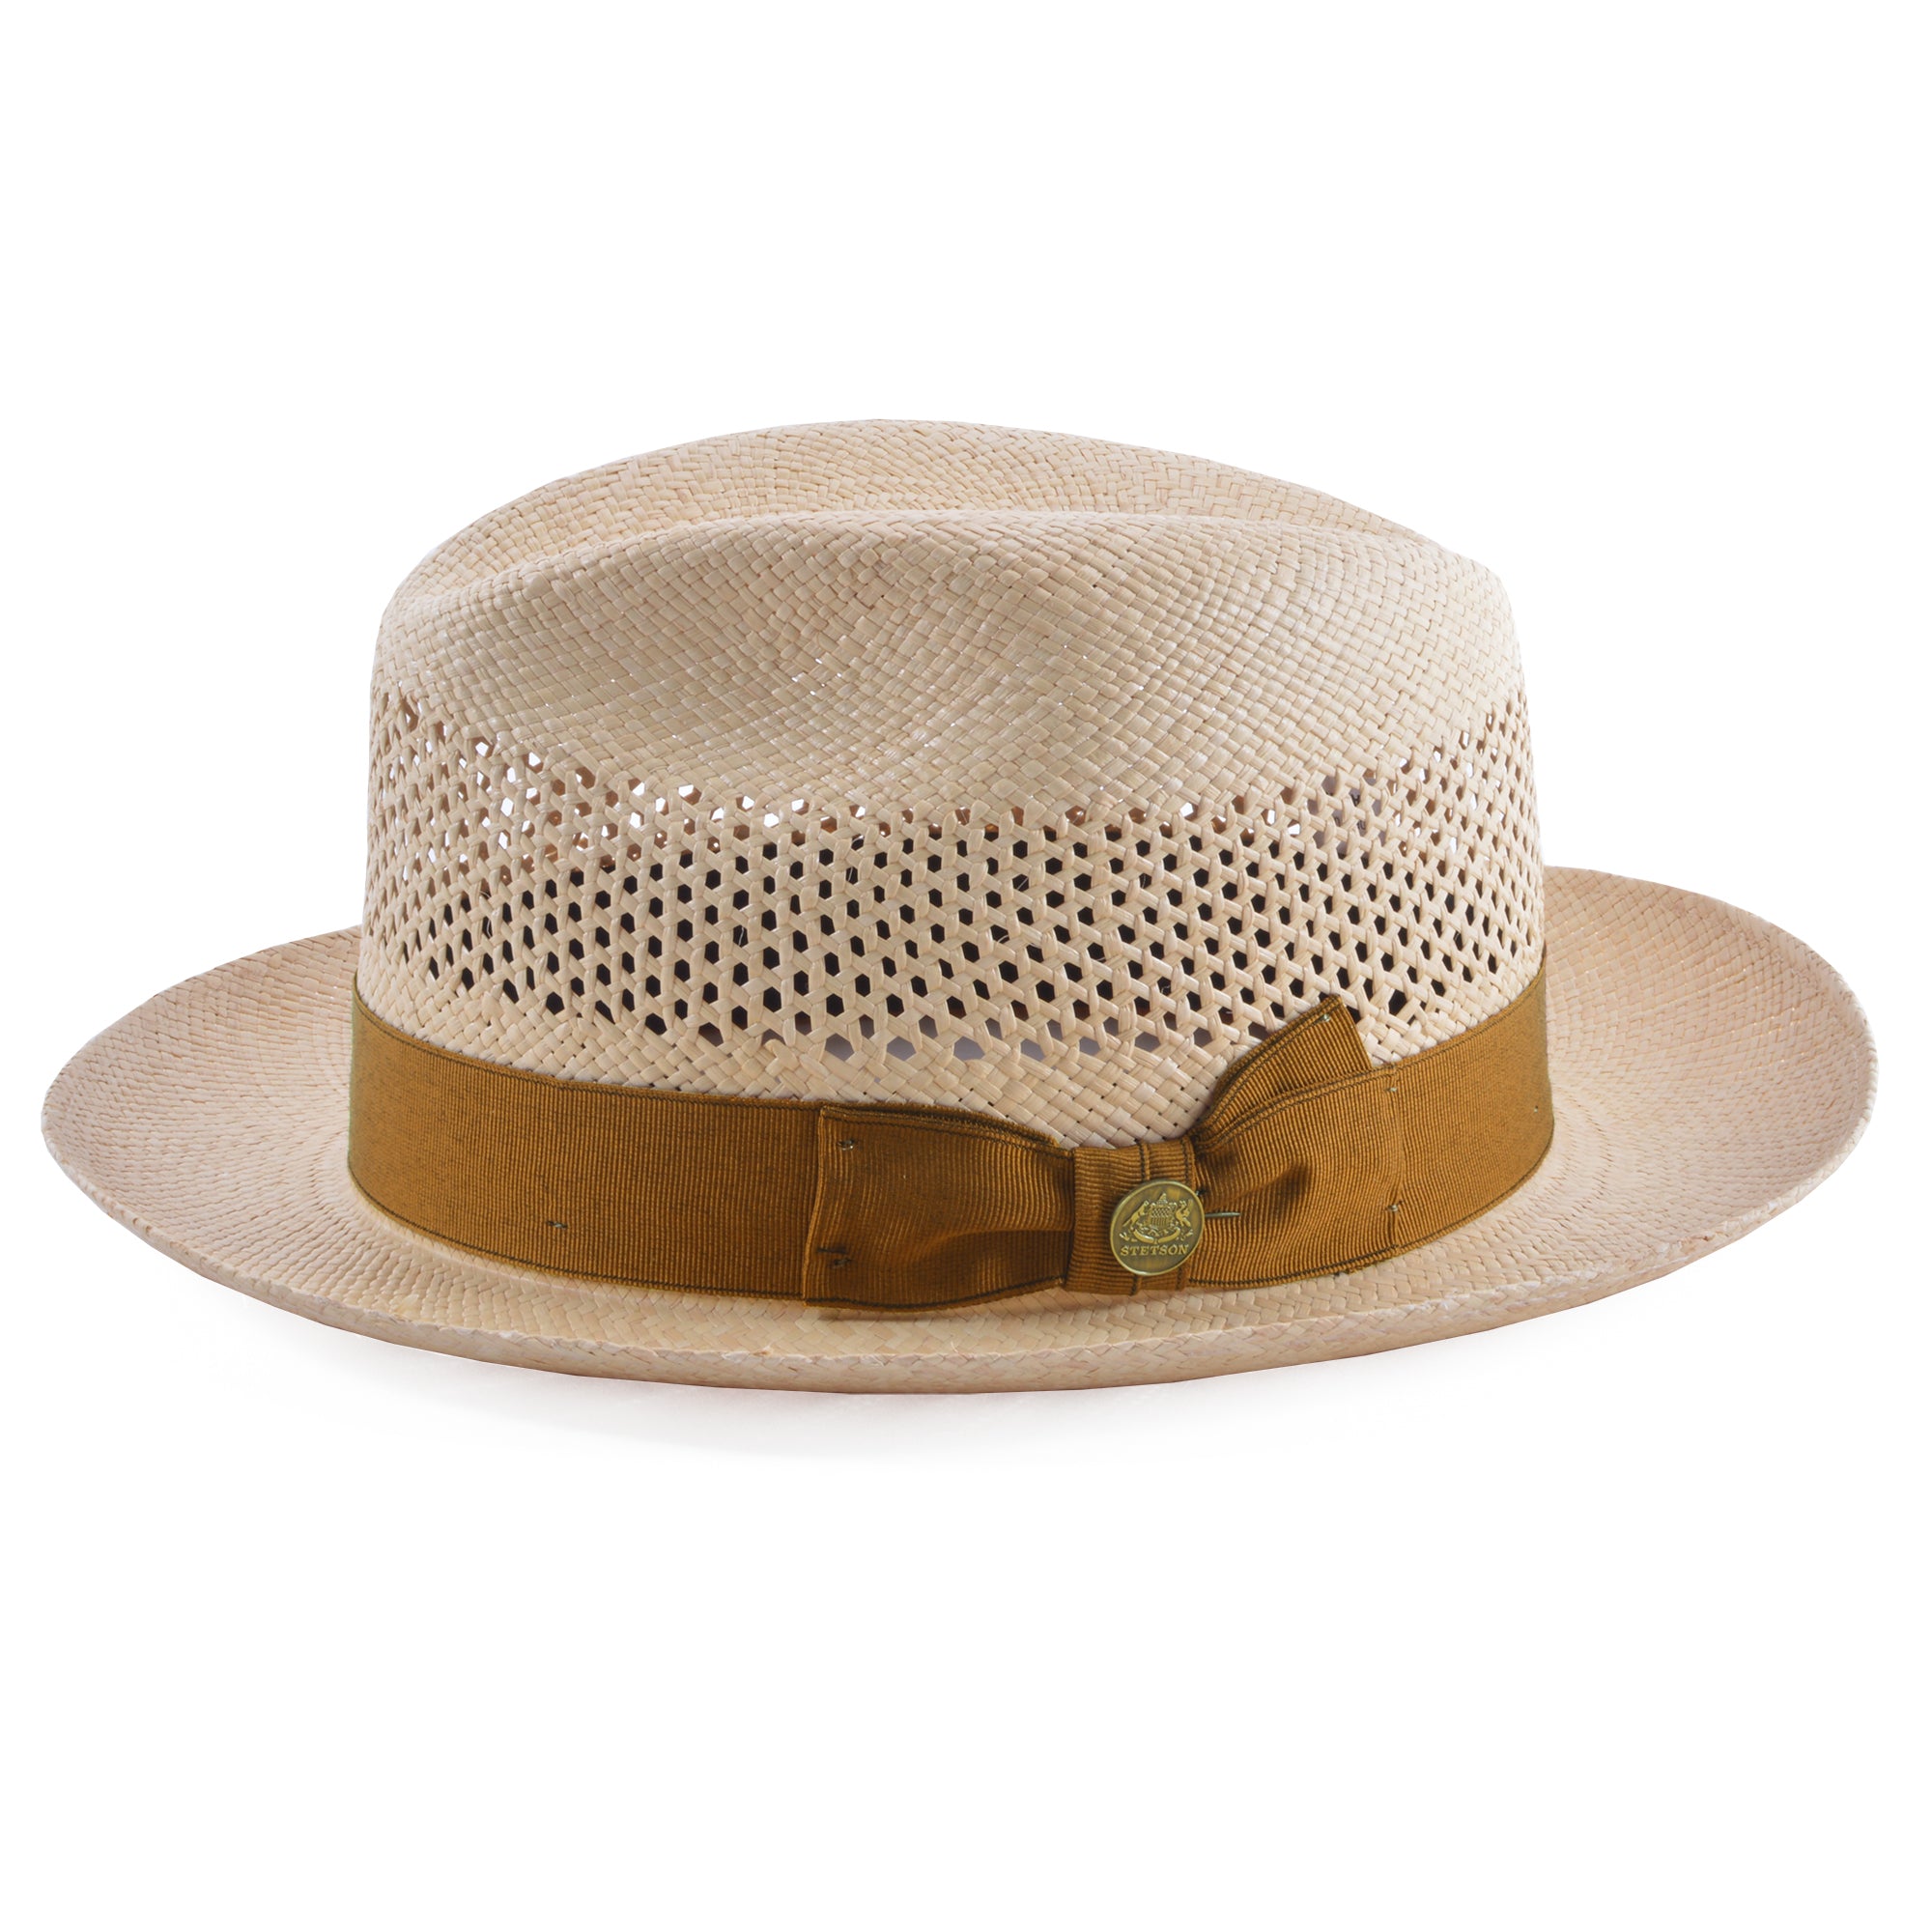 Stetson The Moor Panama Straw Fedora Hat with Hat Box